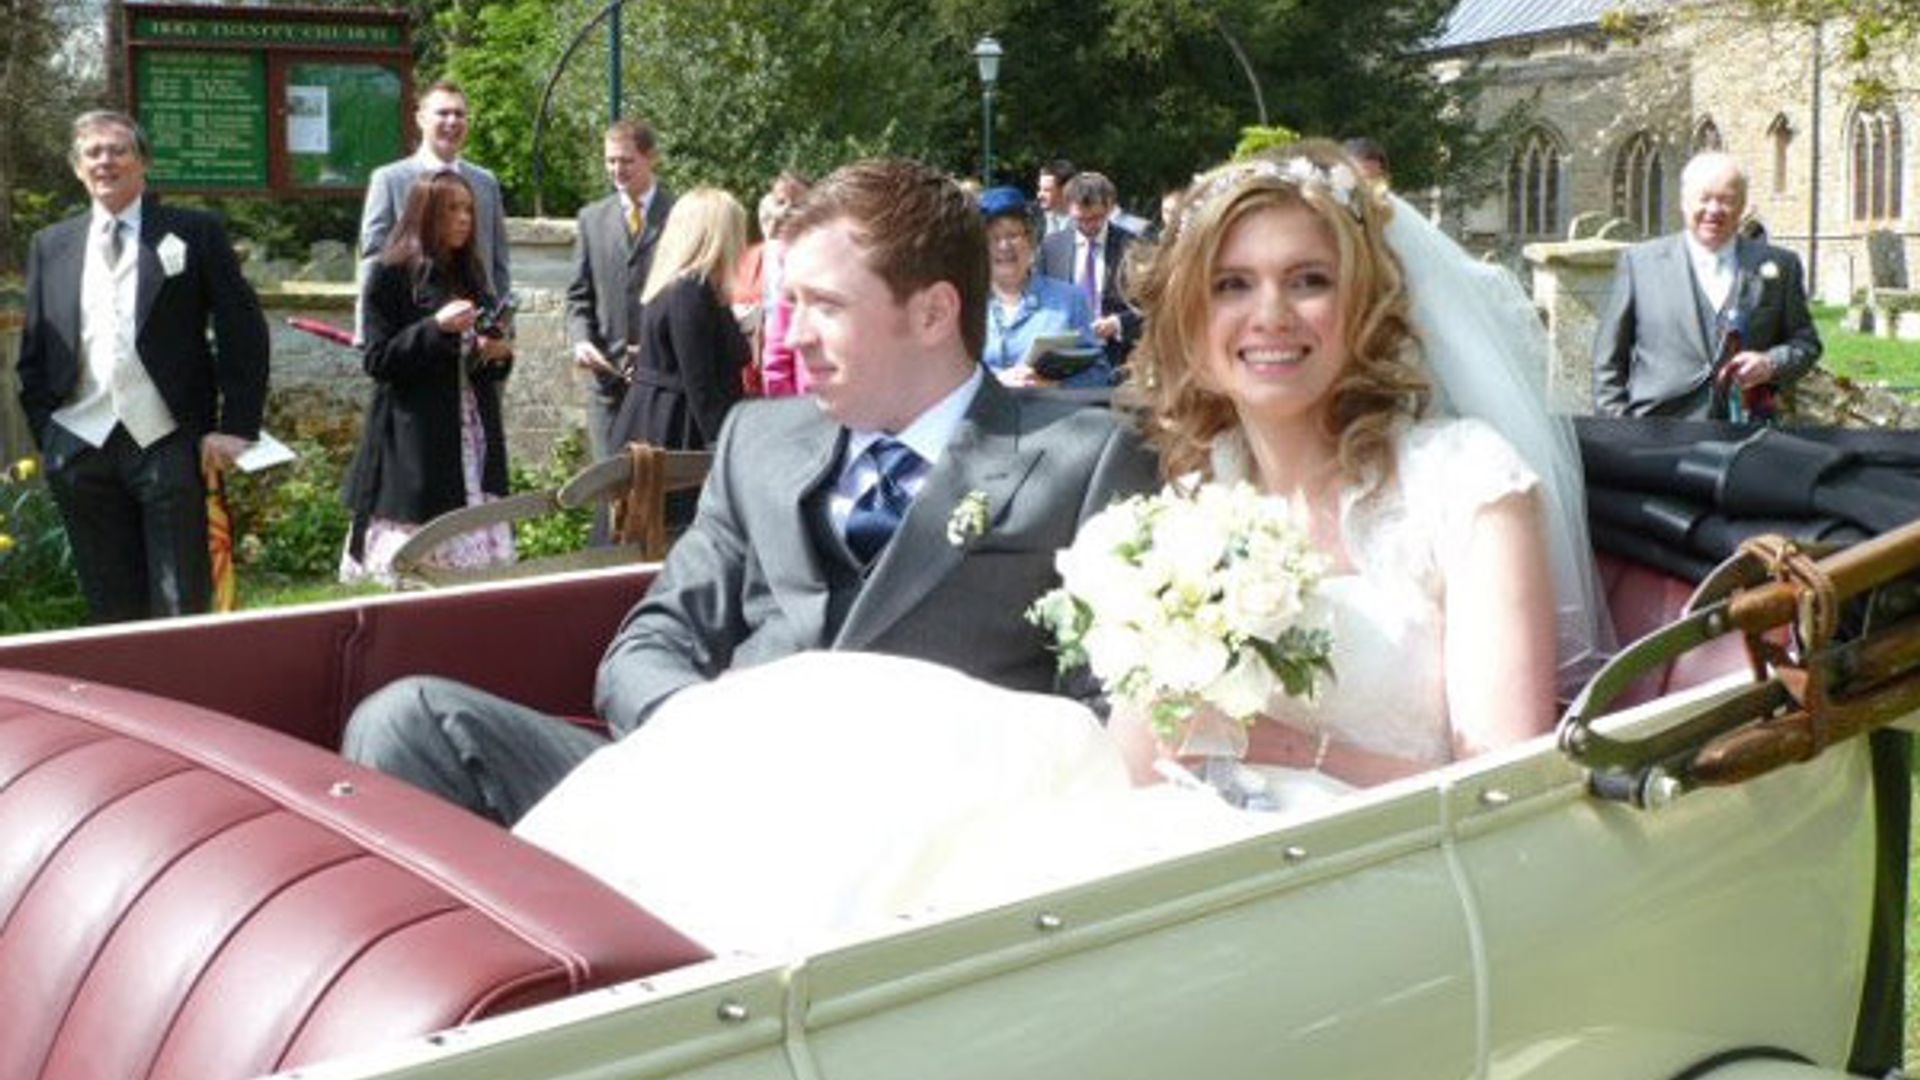 Richard and Charlotte roll into married life in style